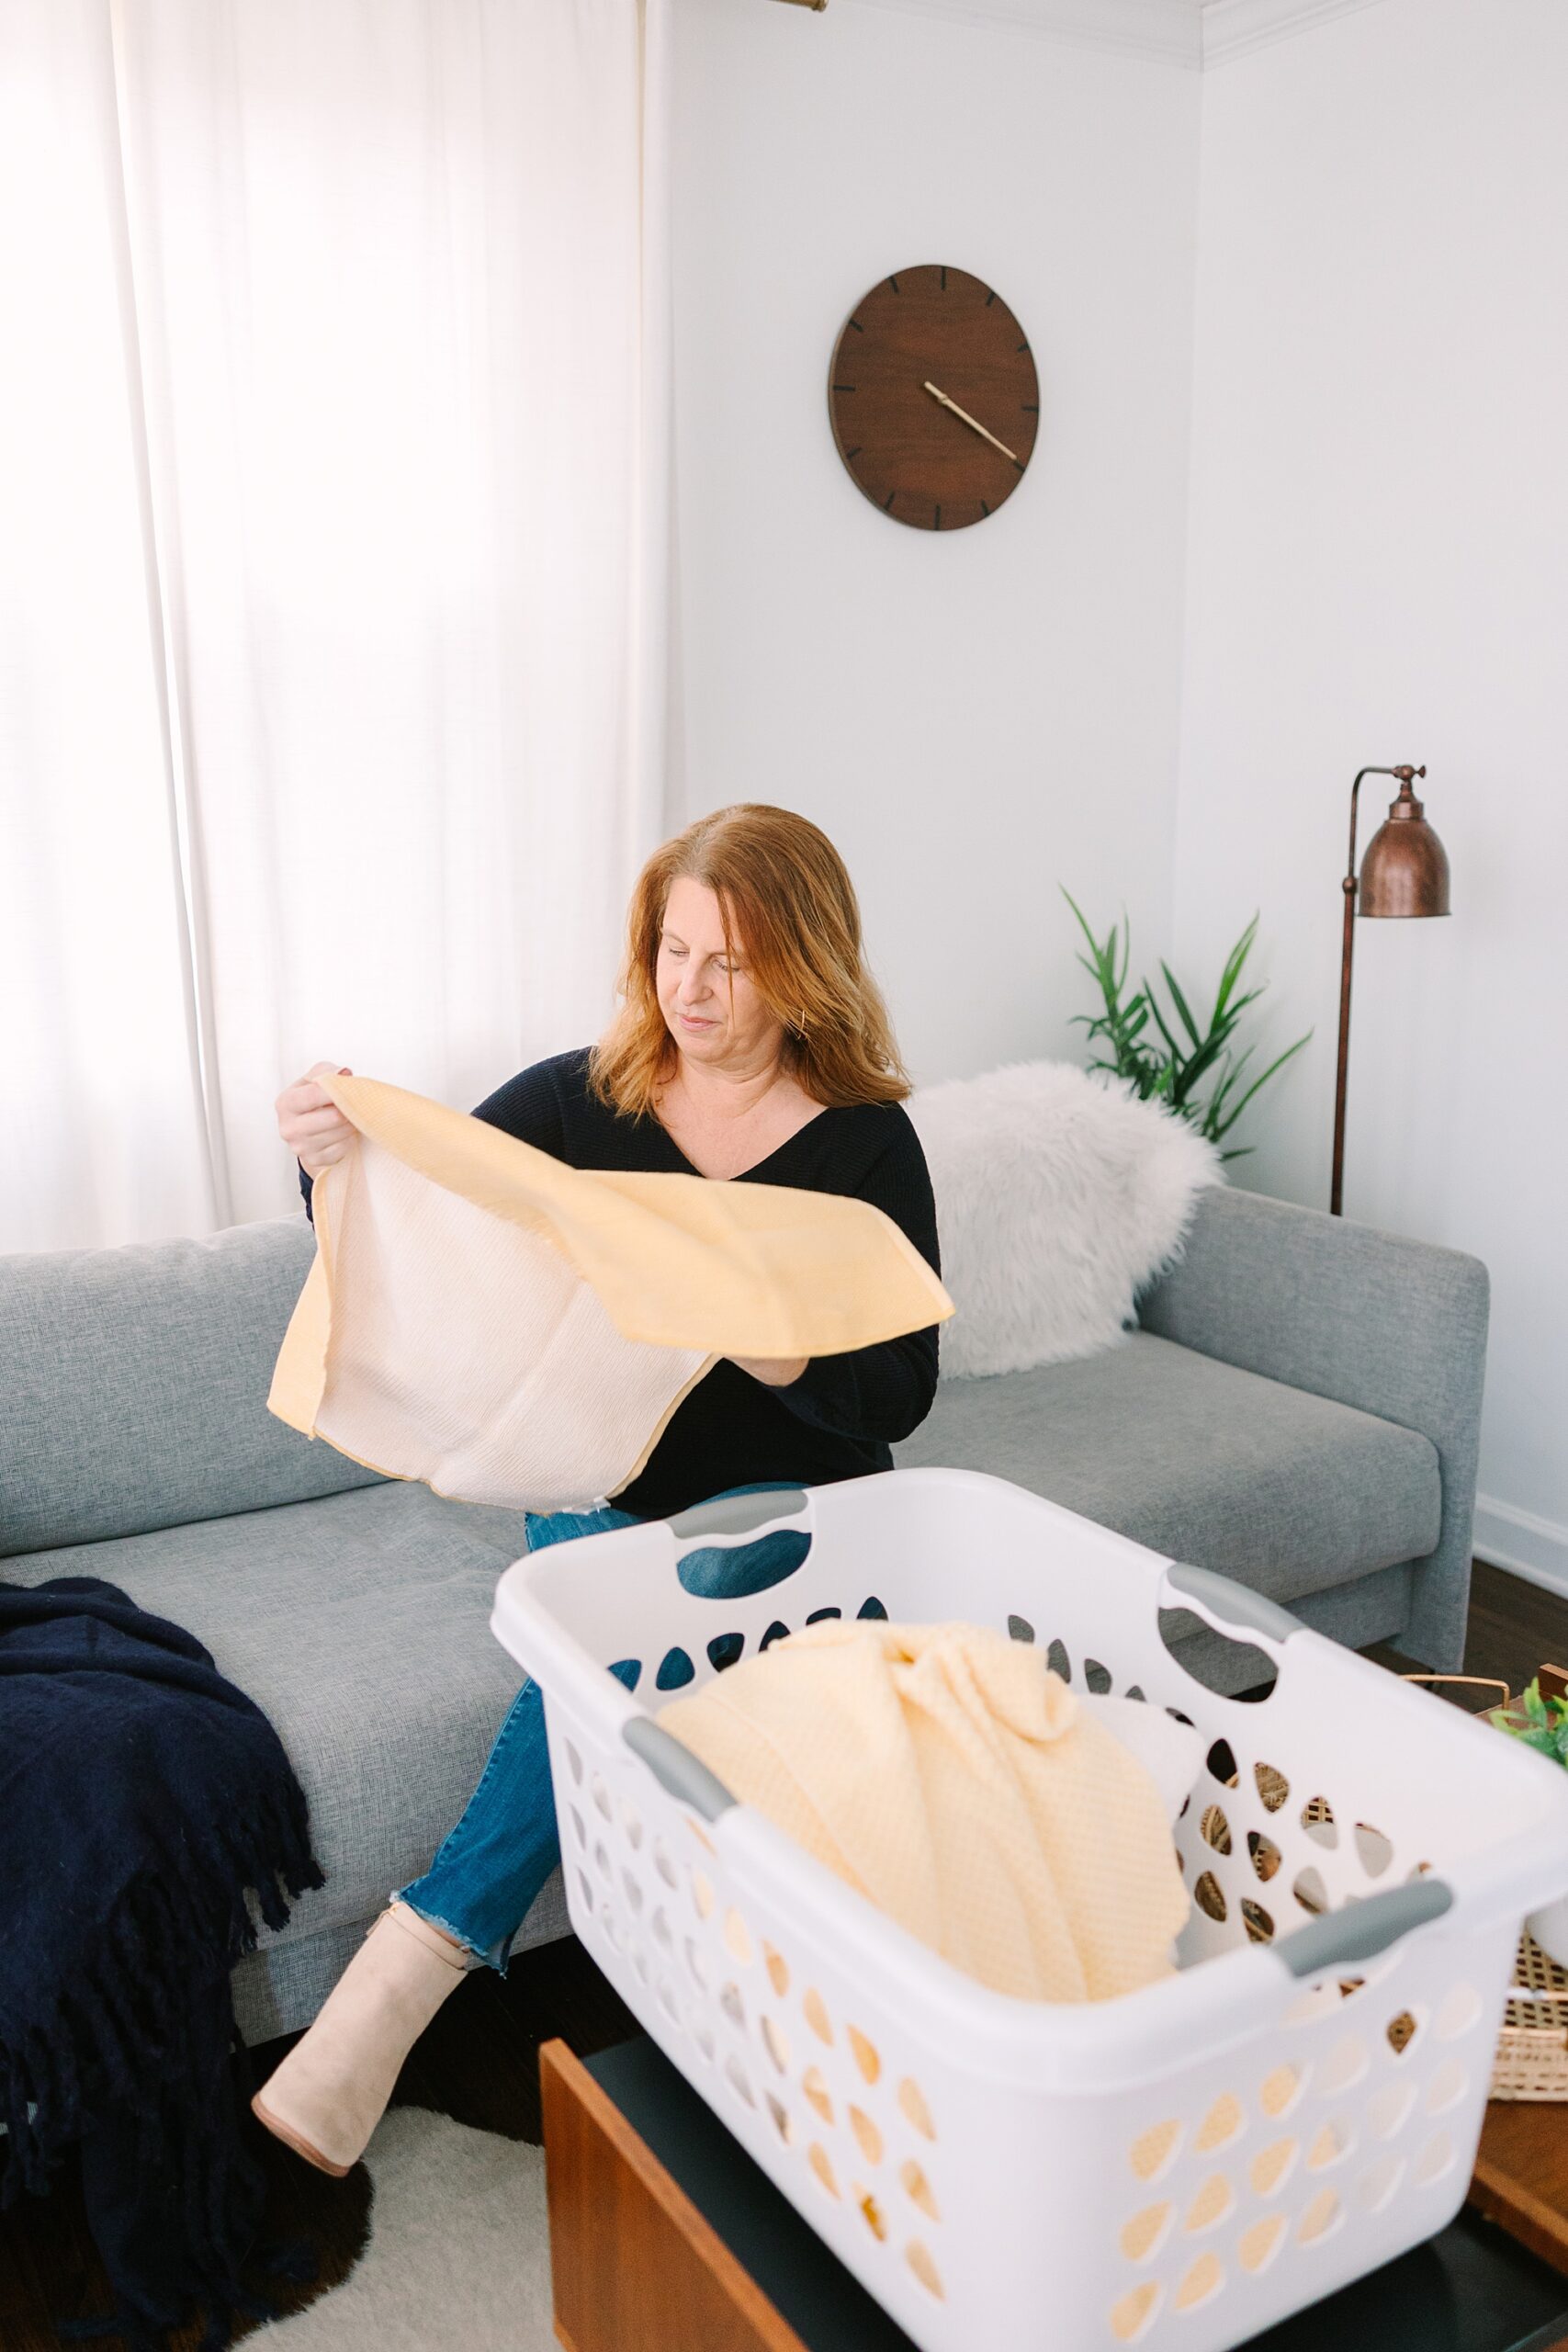 woman folds towels during branding photos